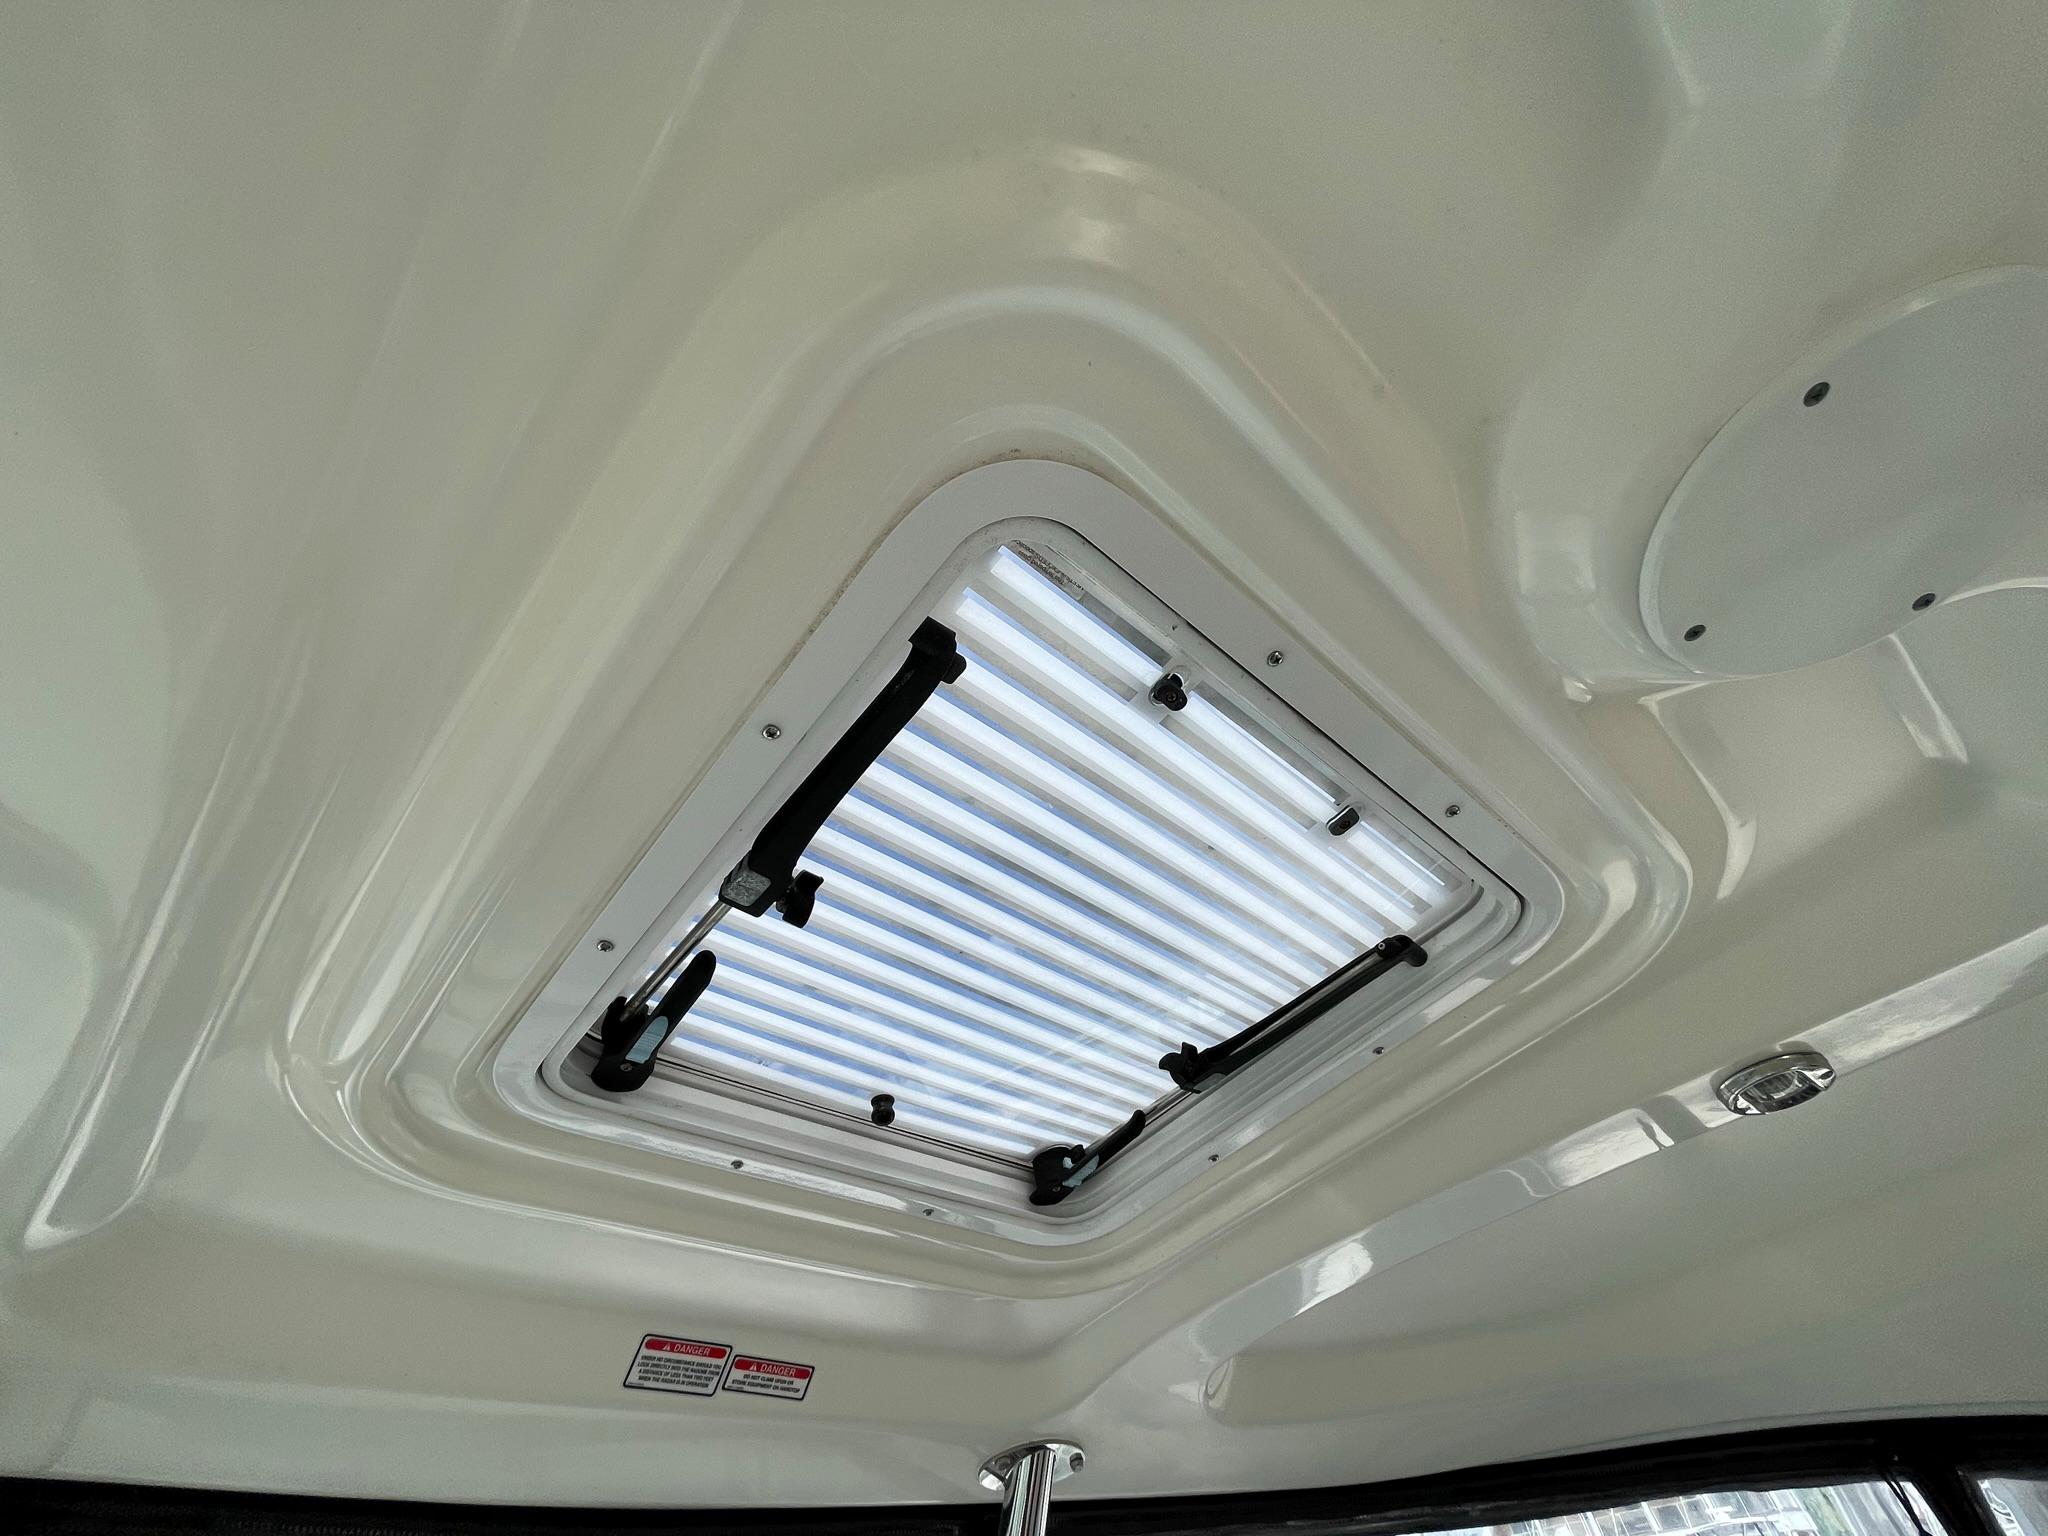 OPENING OVERHEAD HATCH IN THE HARD TOP ABOVE HELM DECK